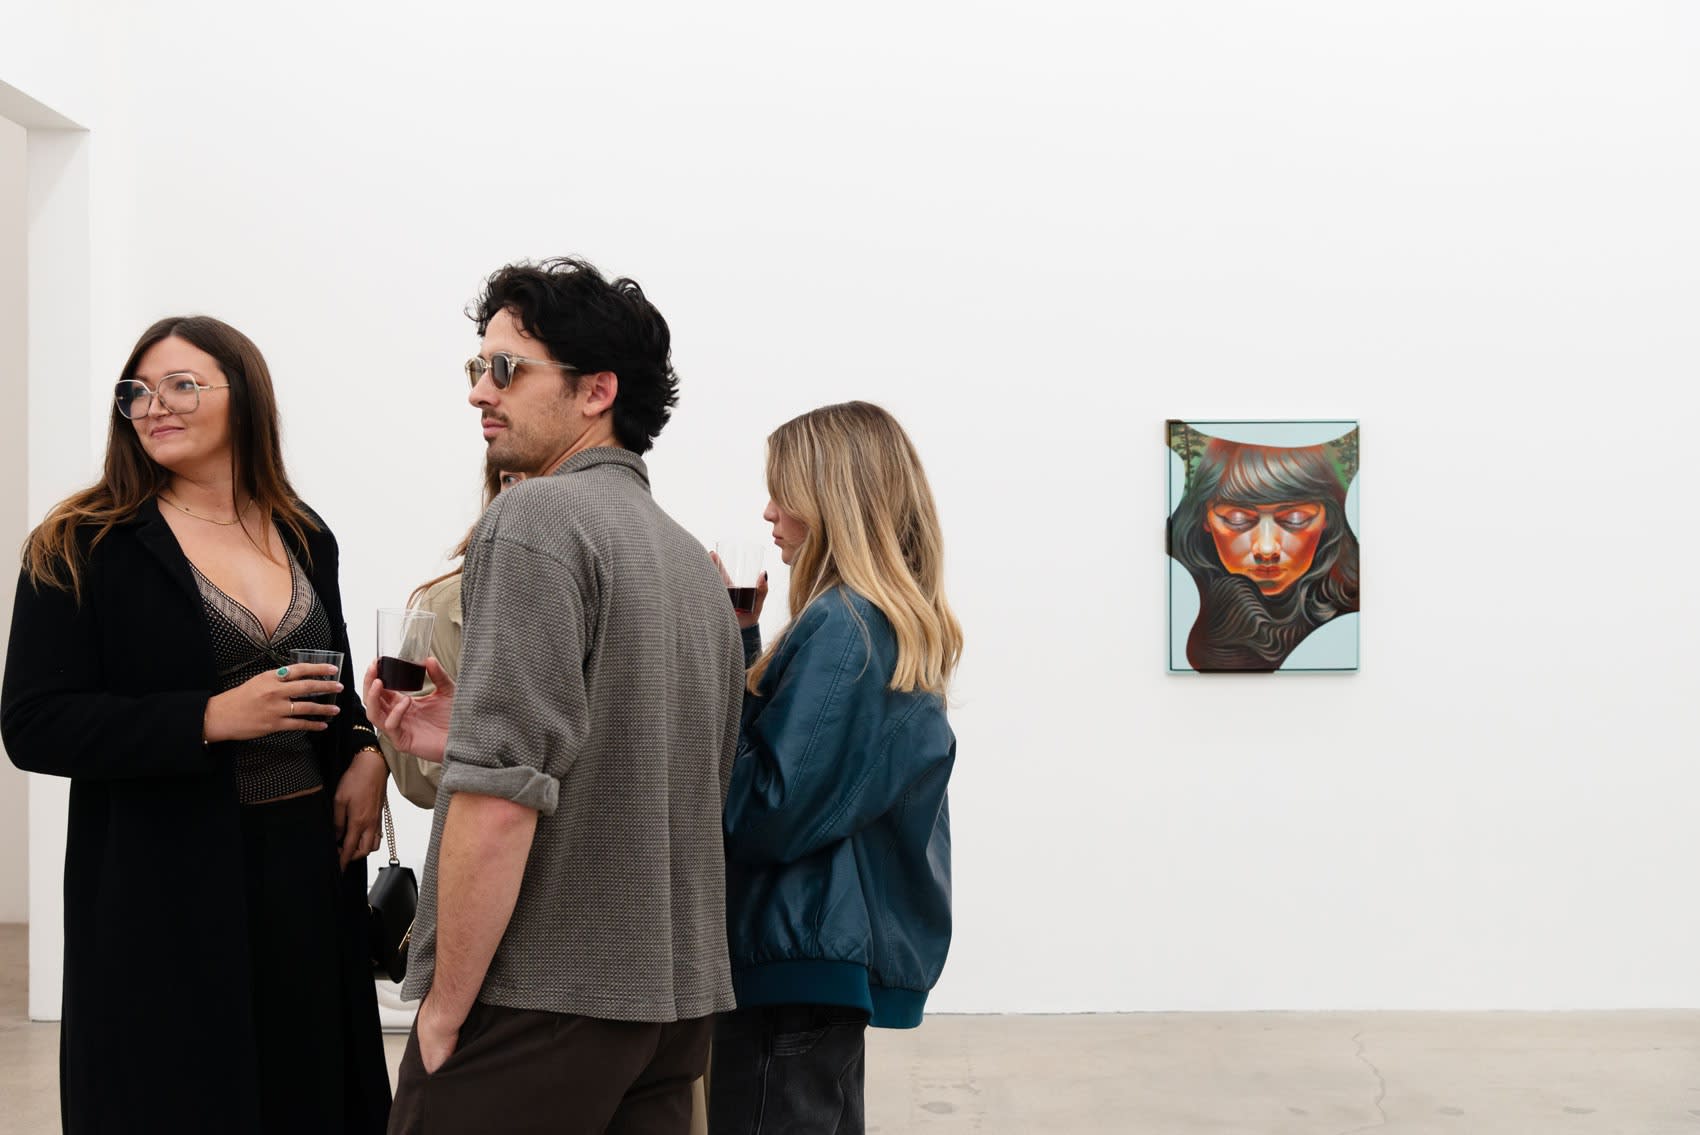 A group of young people in short sleeve shirts converse in a white wall art gallery during an opening reception. A painting of a young woman with brown hair, looking down, hangs on the white wall behind them. 